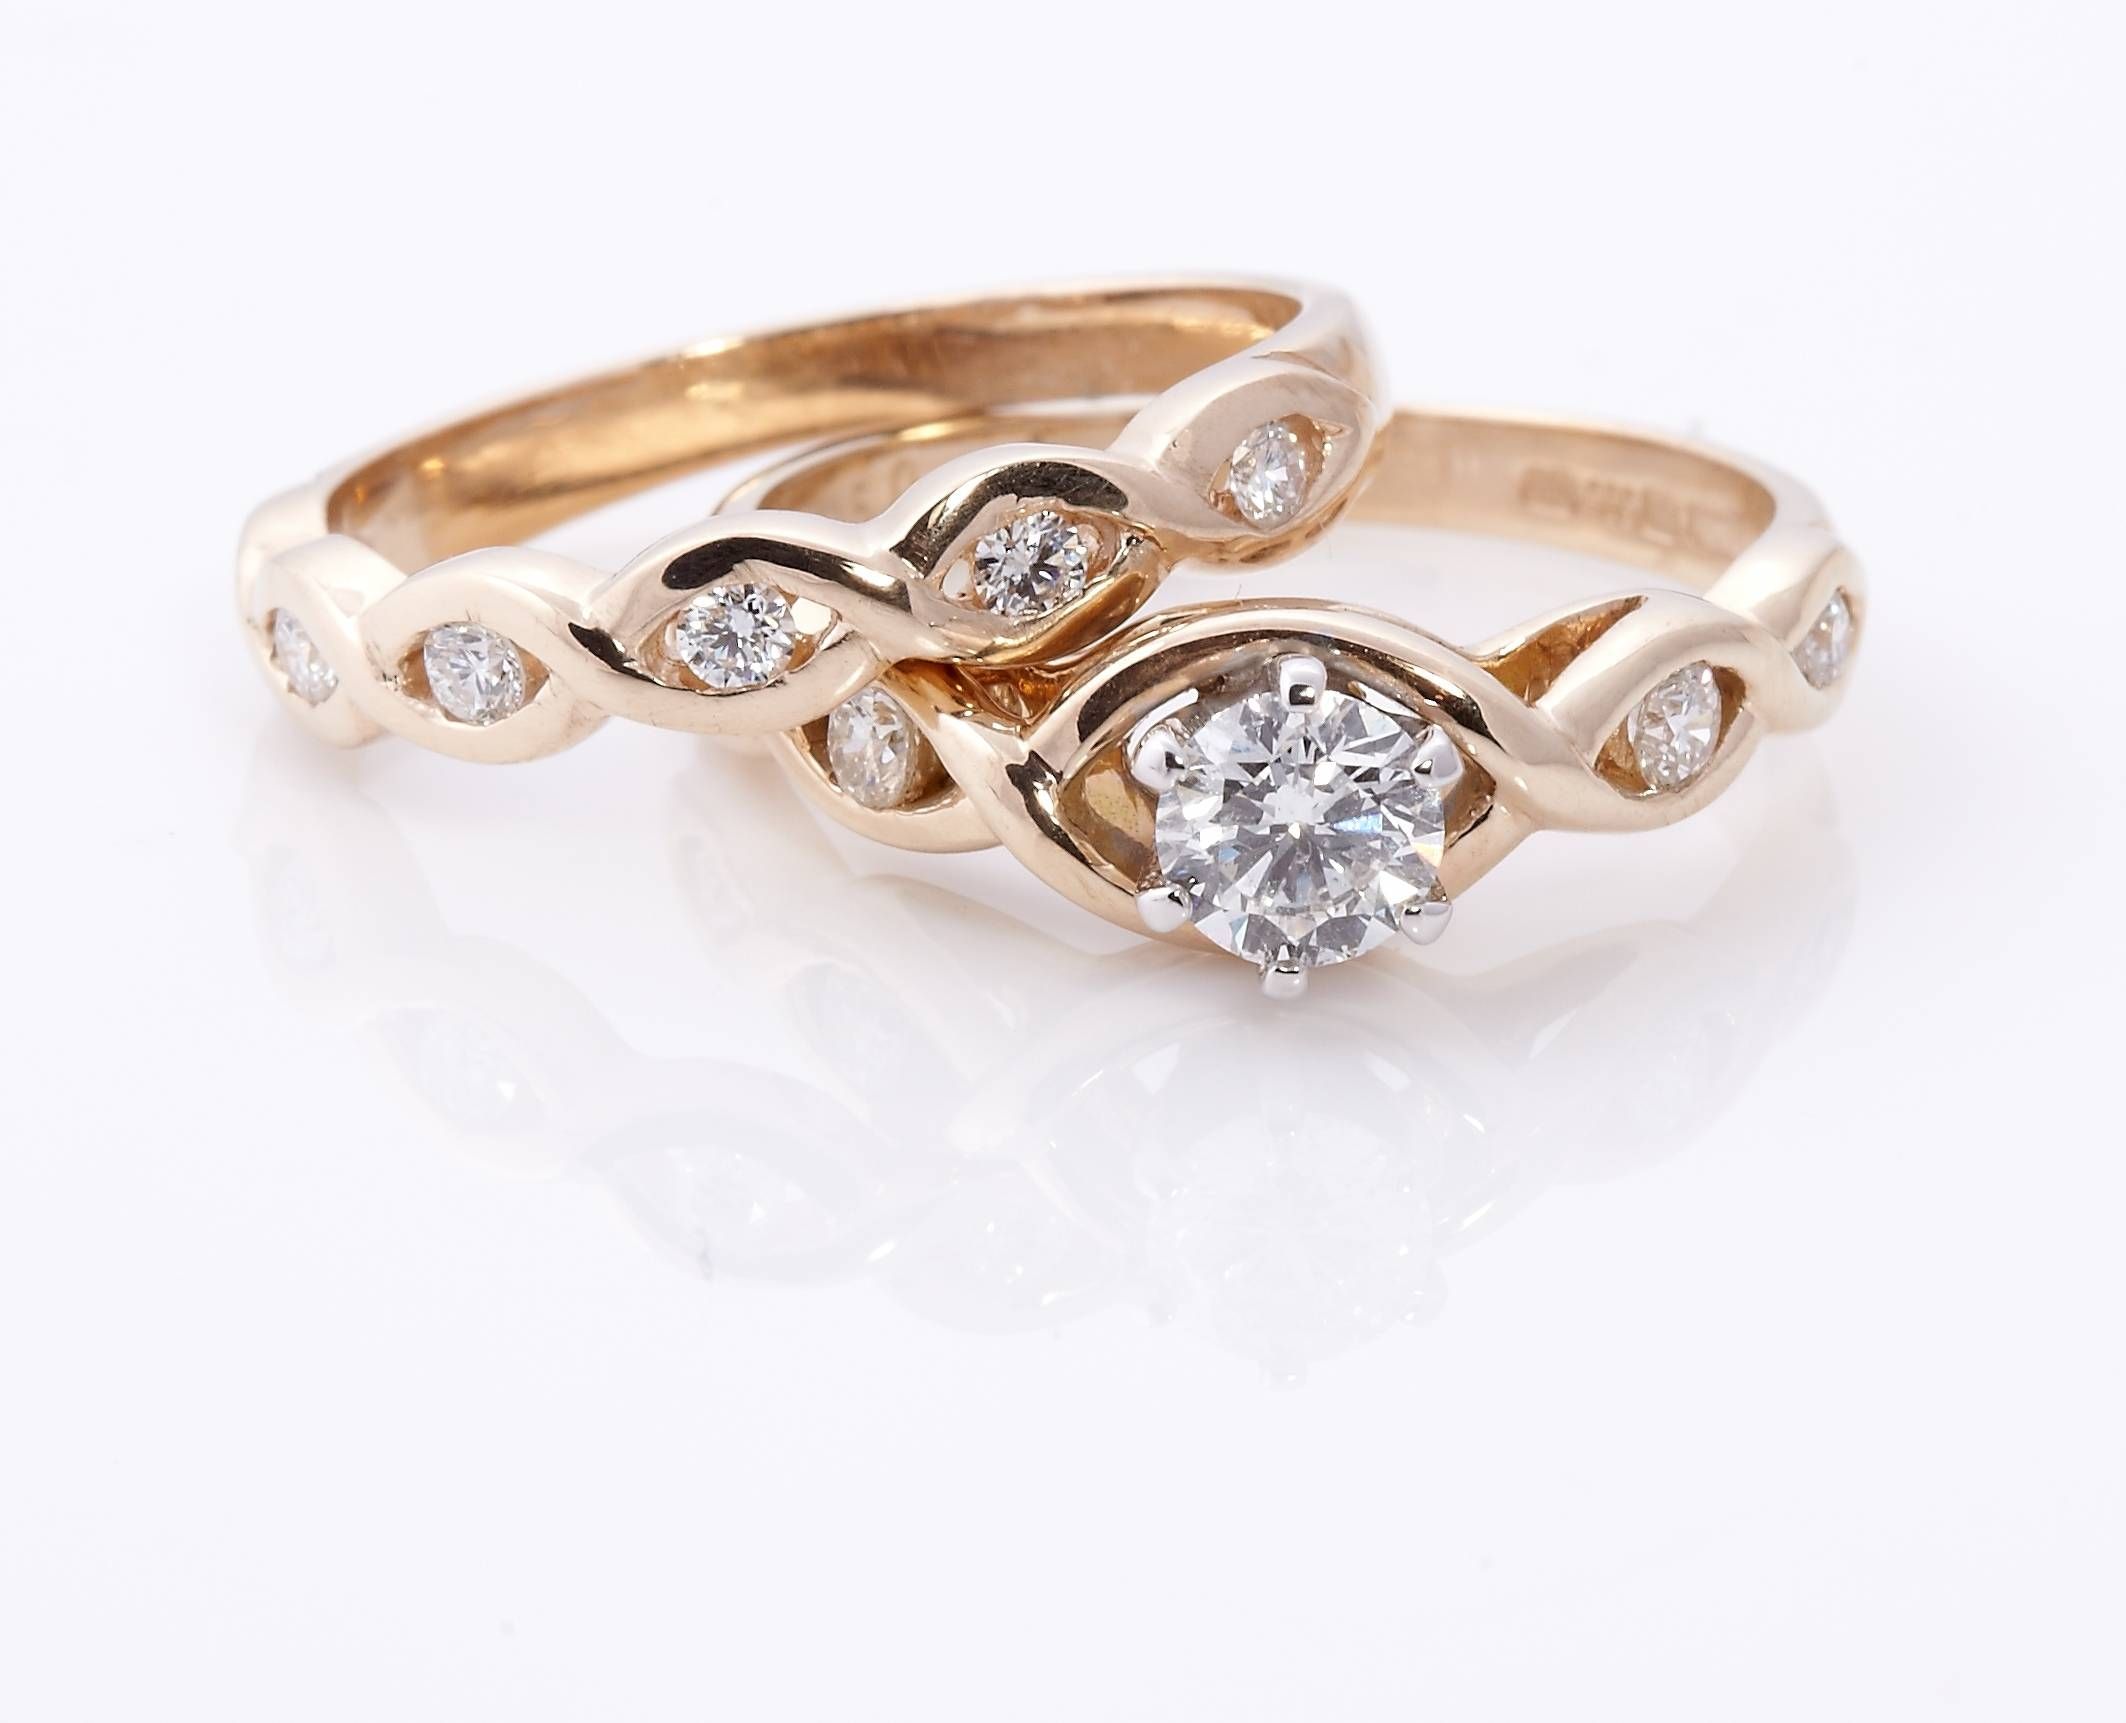 Online Irish Jewelry Store Plans Promotions Ahead Of Valentine's Day Regarding Celtic Engagement And Wedding Ring Sets (View 5 of 15)